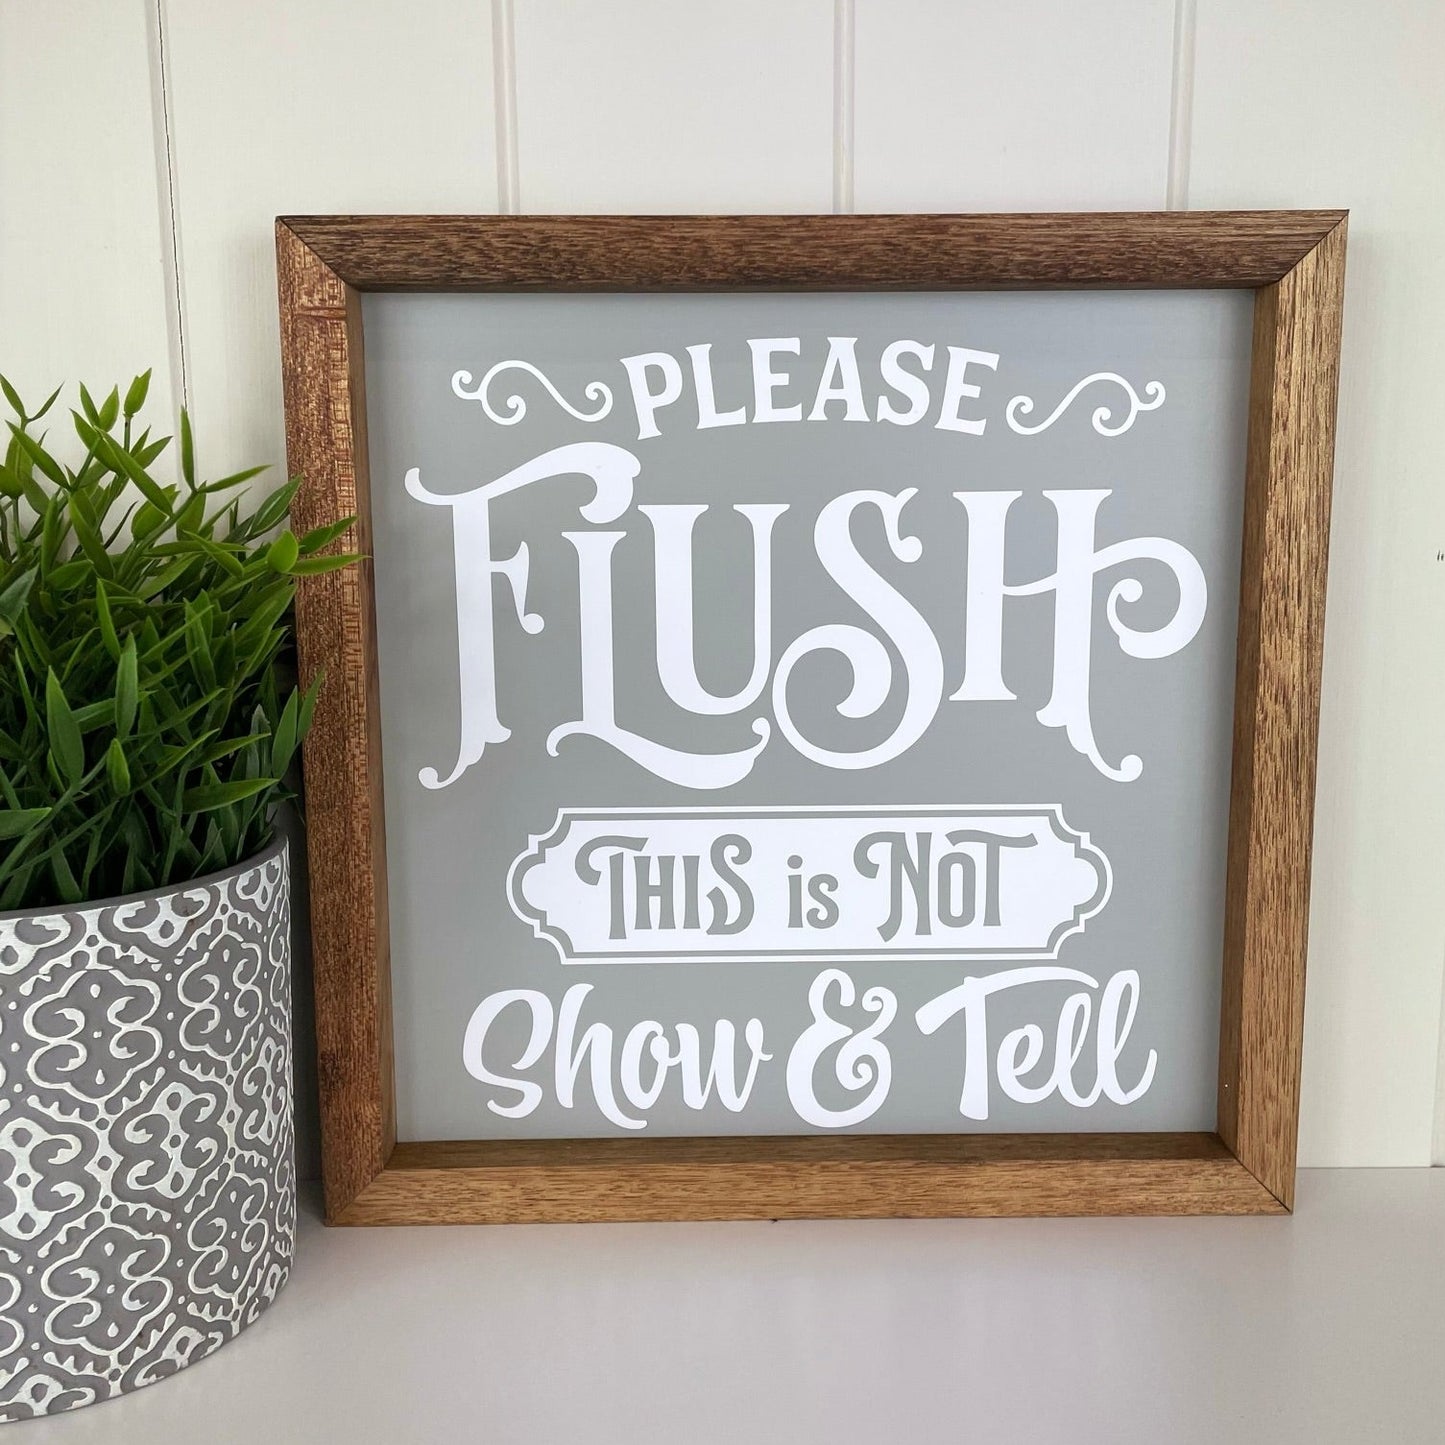 Please Flush... This is not Show & Tell